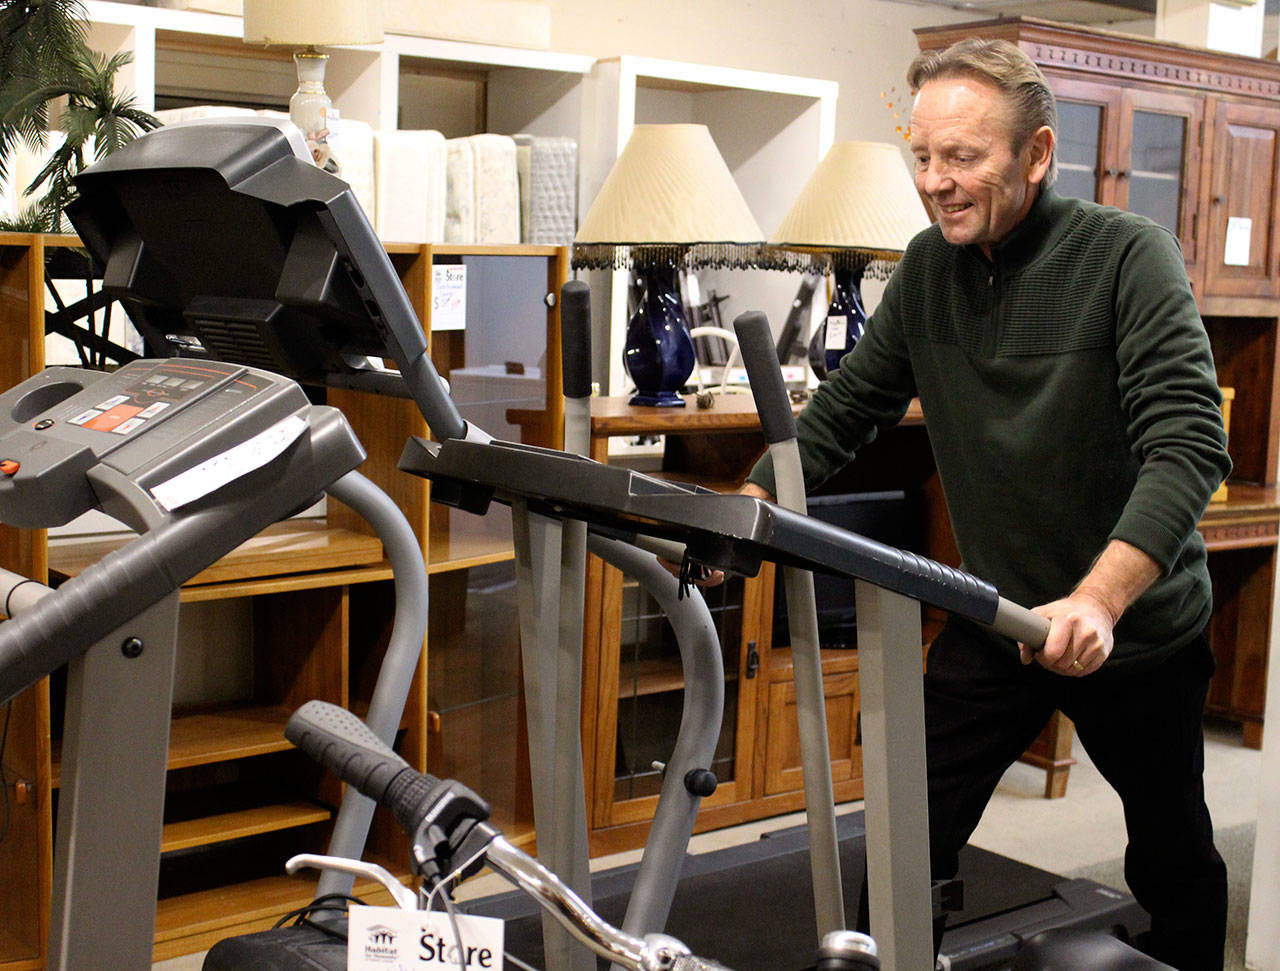 New stores director Tony Persson demonstrates that home exercise equipment is sometimes donated and put up for sale at the Oak Harbor Habitat for Humanity store. (Photo by Patricia Guthrie/Whidbey News-Times)